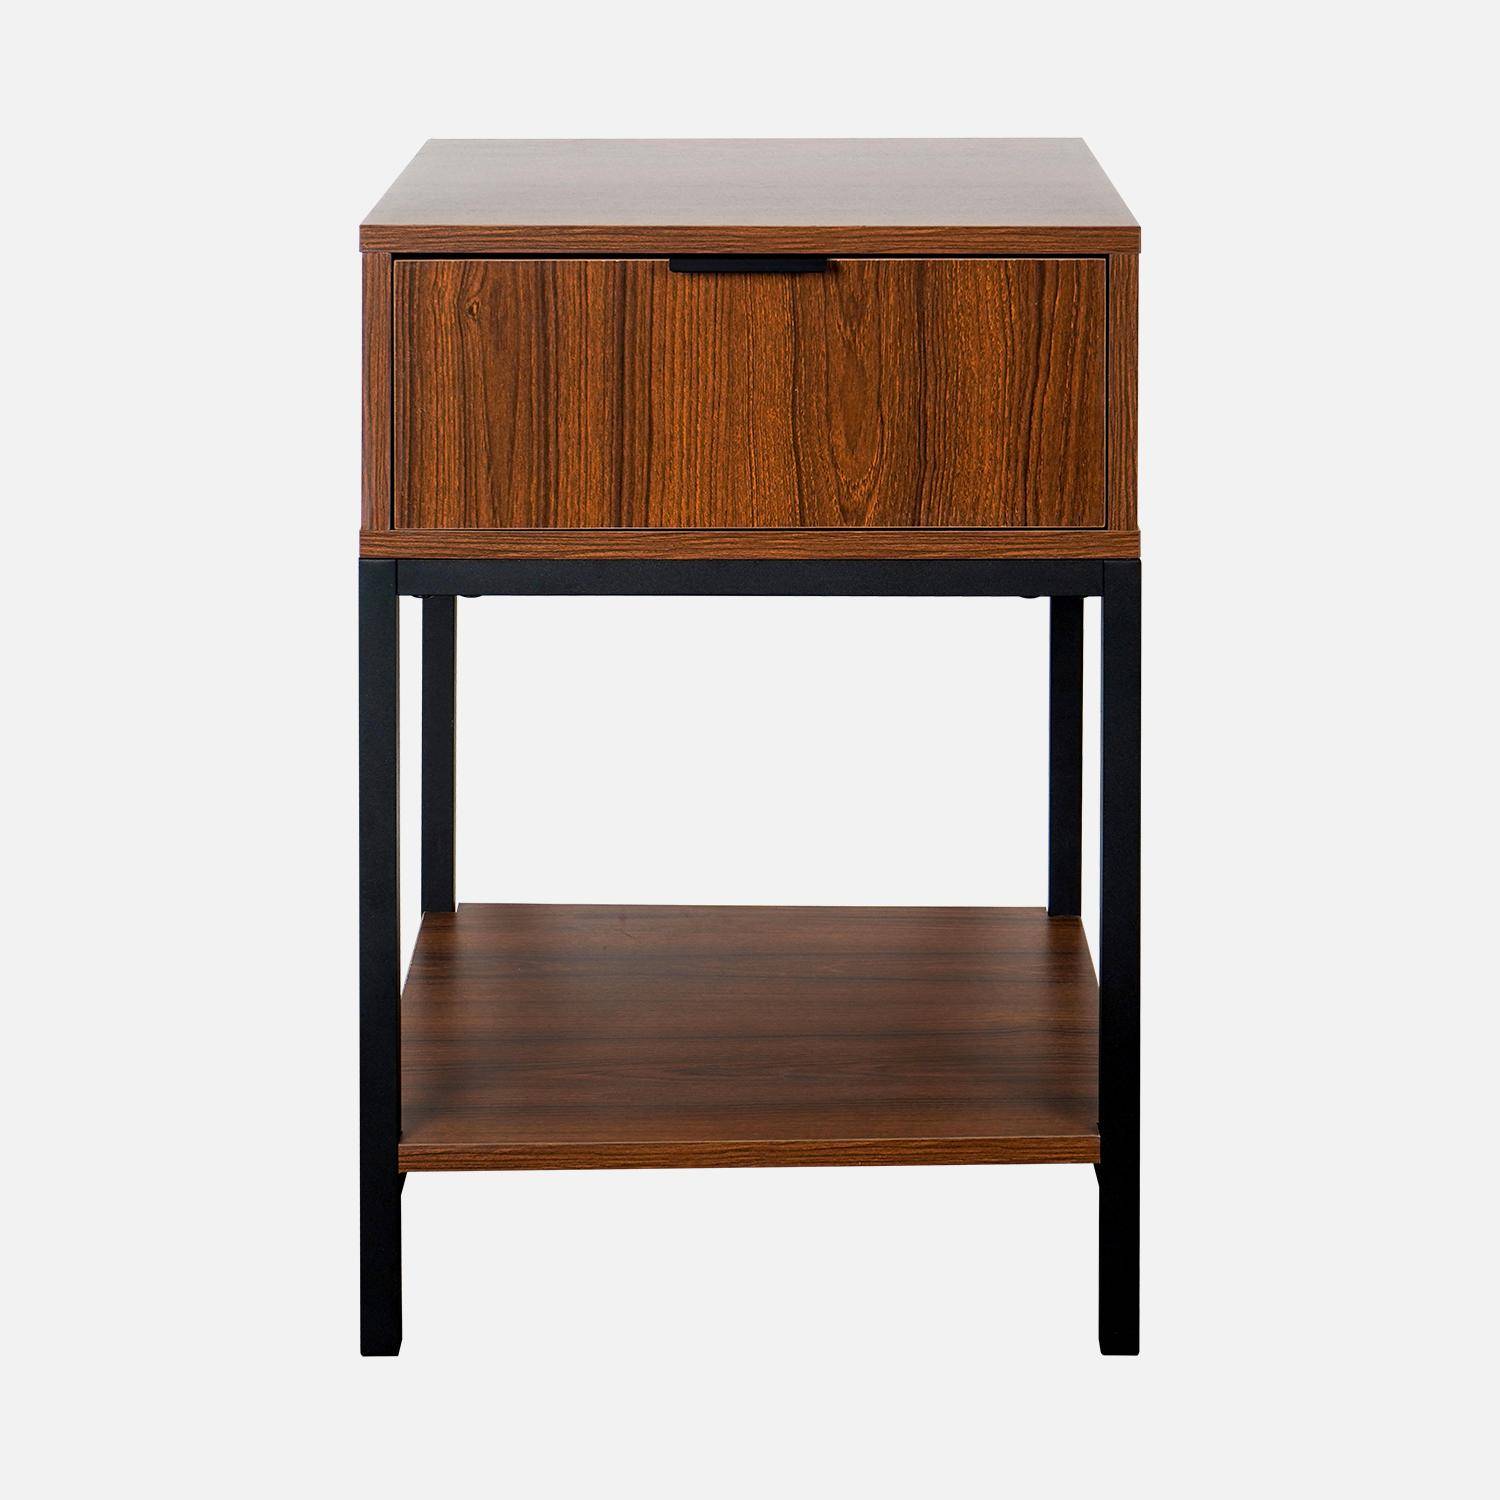 Walnut-coloured bedside table with black metal legs and handle - 1 drawer and 1 shelf Photo2